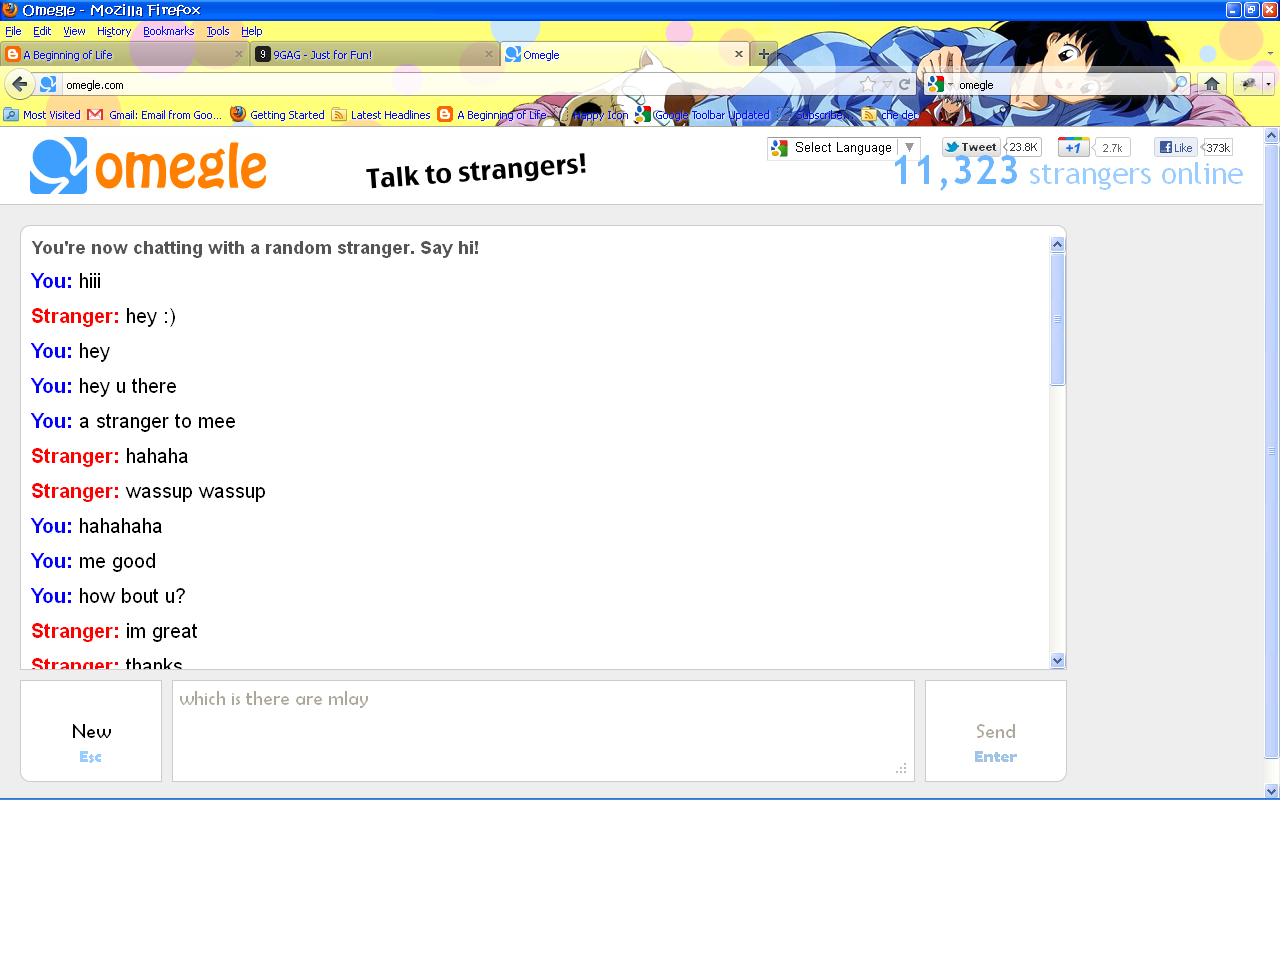 Chat now with. Omegle talk strangers. Камкиттис Omegl. Omegle talking to strangers. Don't chat with strangers русификатор.